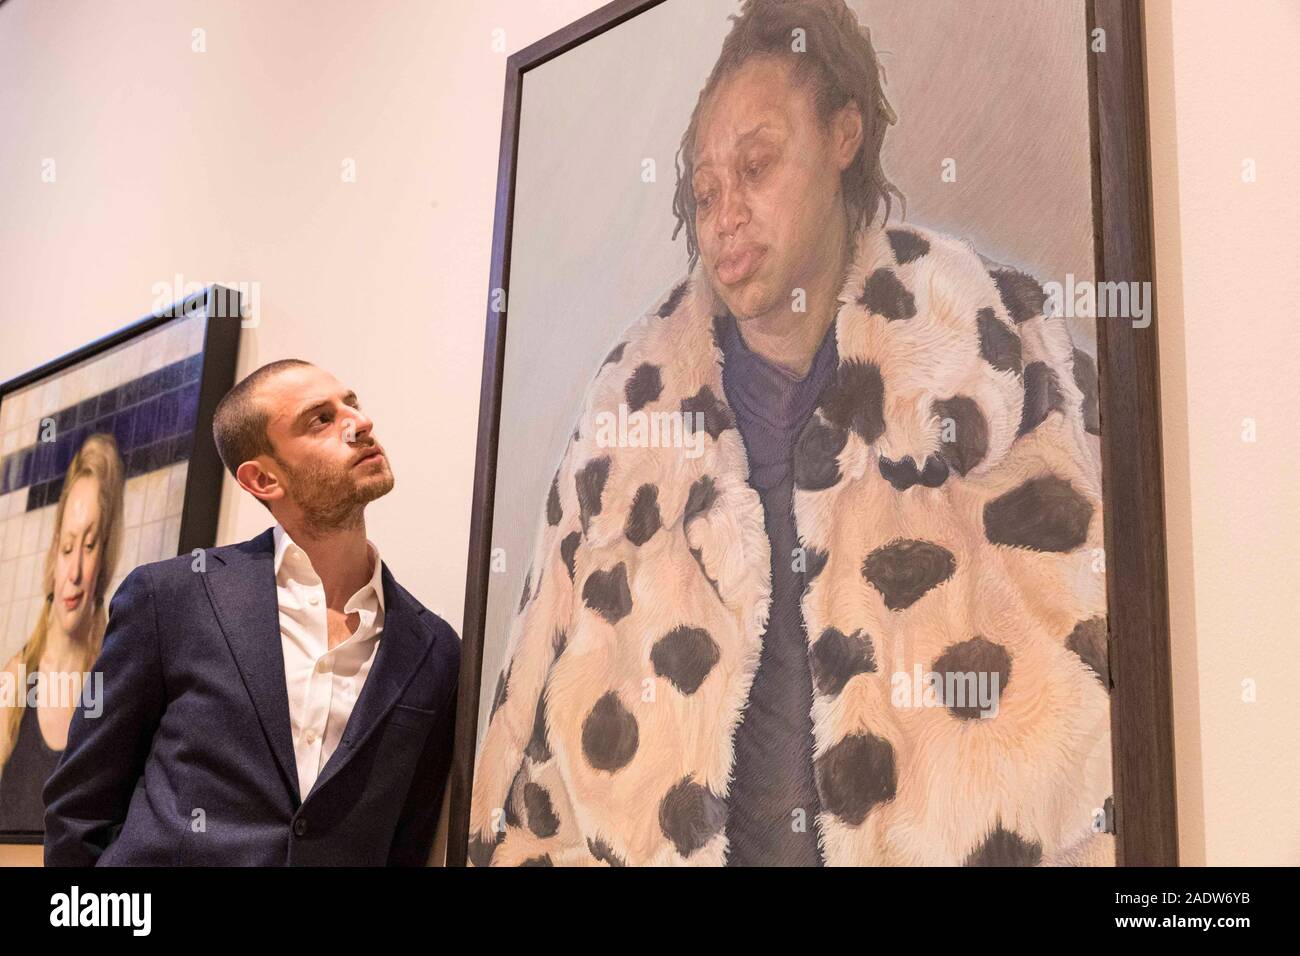 Edinburgh, United Kingdom. 05 December, 2019 Pictured: Charlie Schaffer and Imara in her Winter Coat at the BP Portrait Award Exhibition. The BP Portrait Award is the most prestigious portrait painting competition in the world and represents the very best in contemporary portrait painting. The BP Portrait Award is now in its tenth year at the Scottish National Portrait Gallery. Credit: Rich Dyson/Alamy Live News Stock Photo